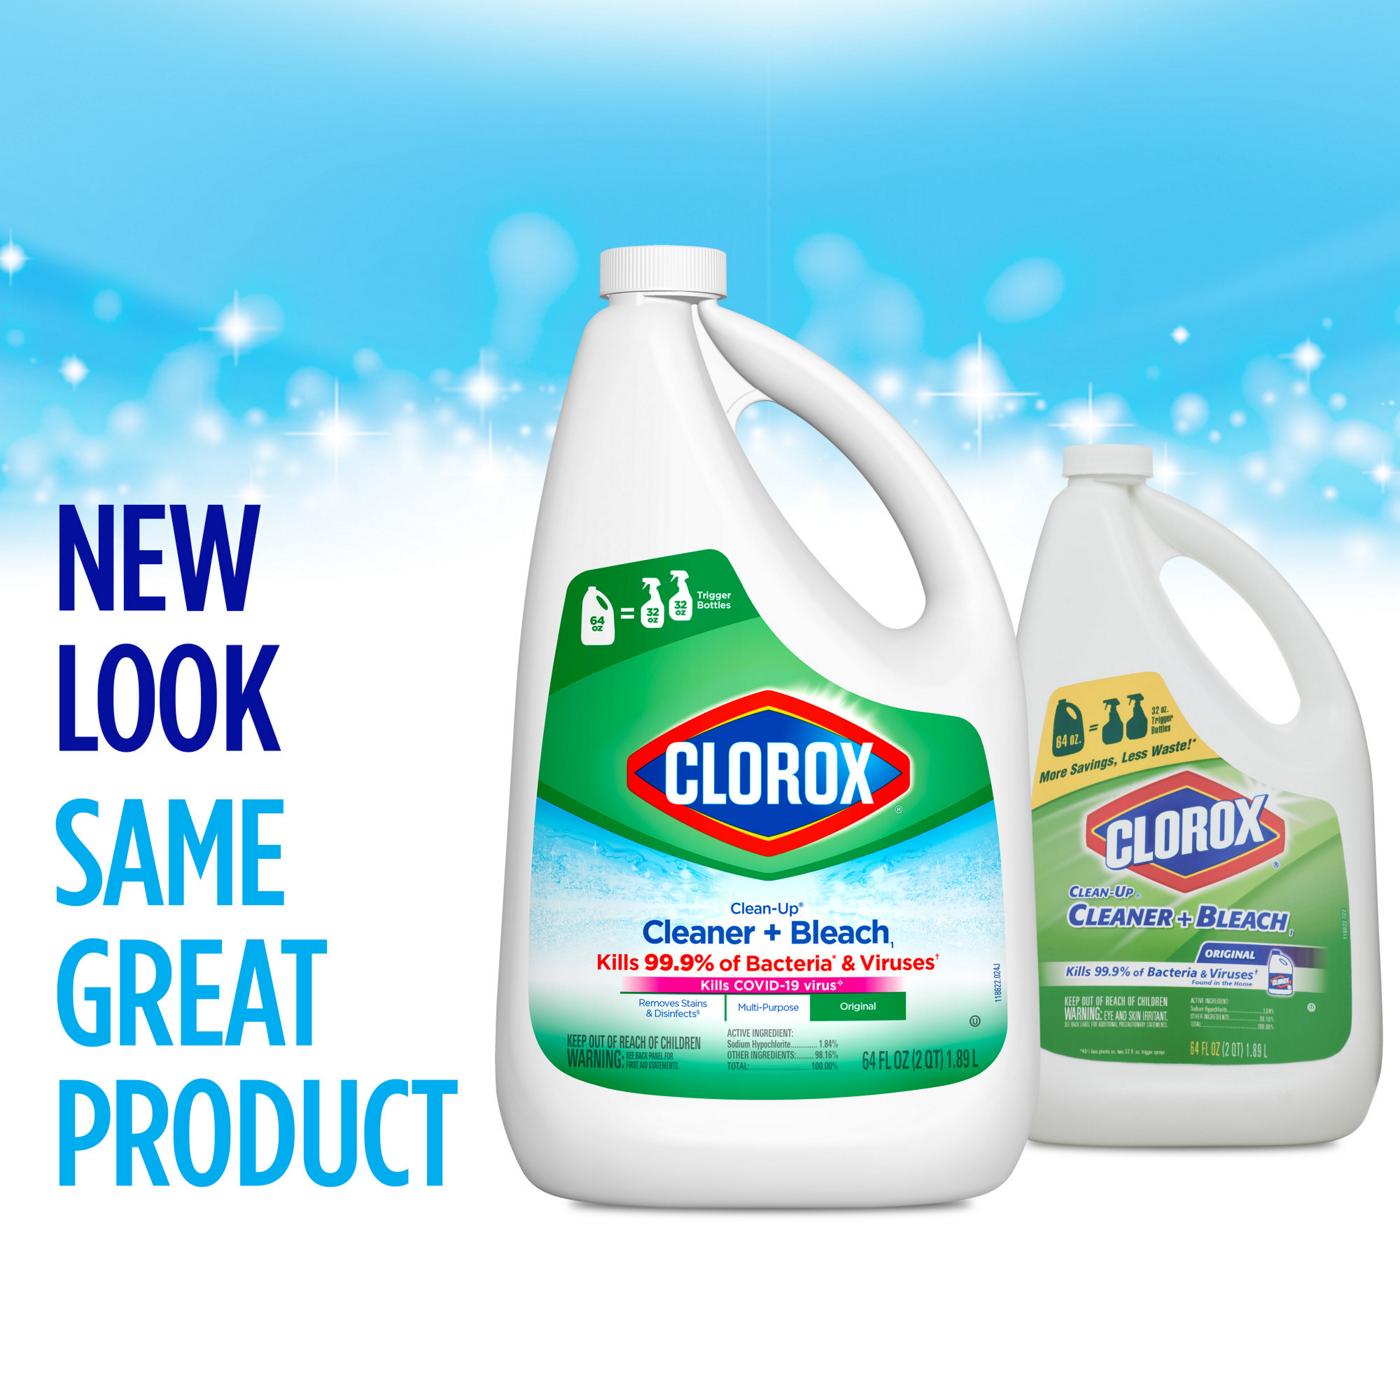 Clorox Clean-Up Cleaner & Bleach; image 11 of 13